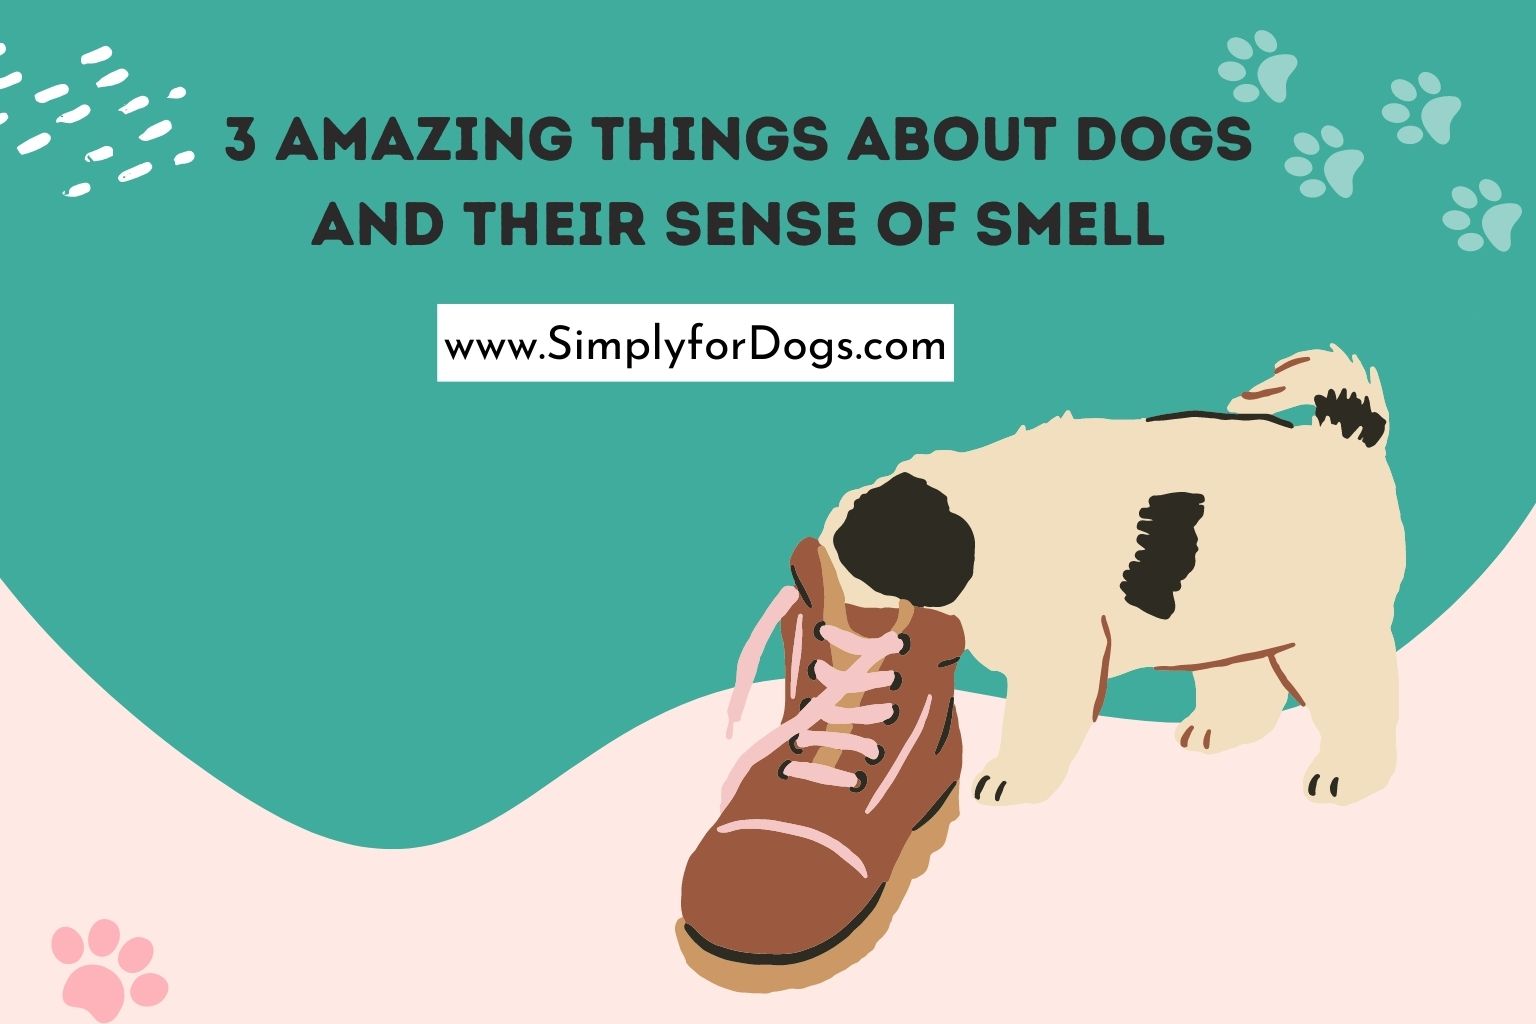 3 Amazing Things about Dogs and Their Sense of Smell